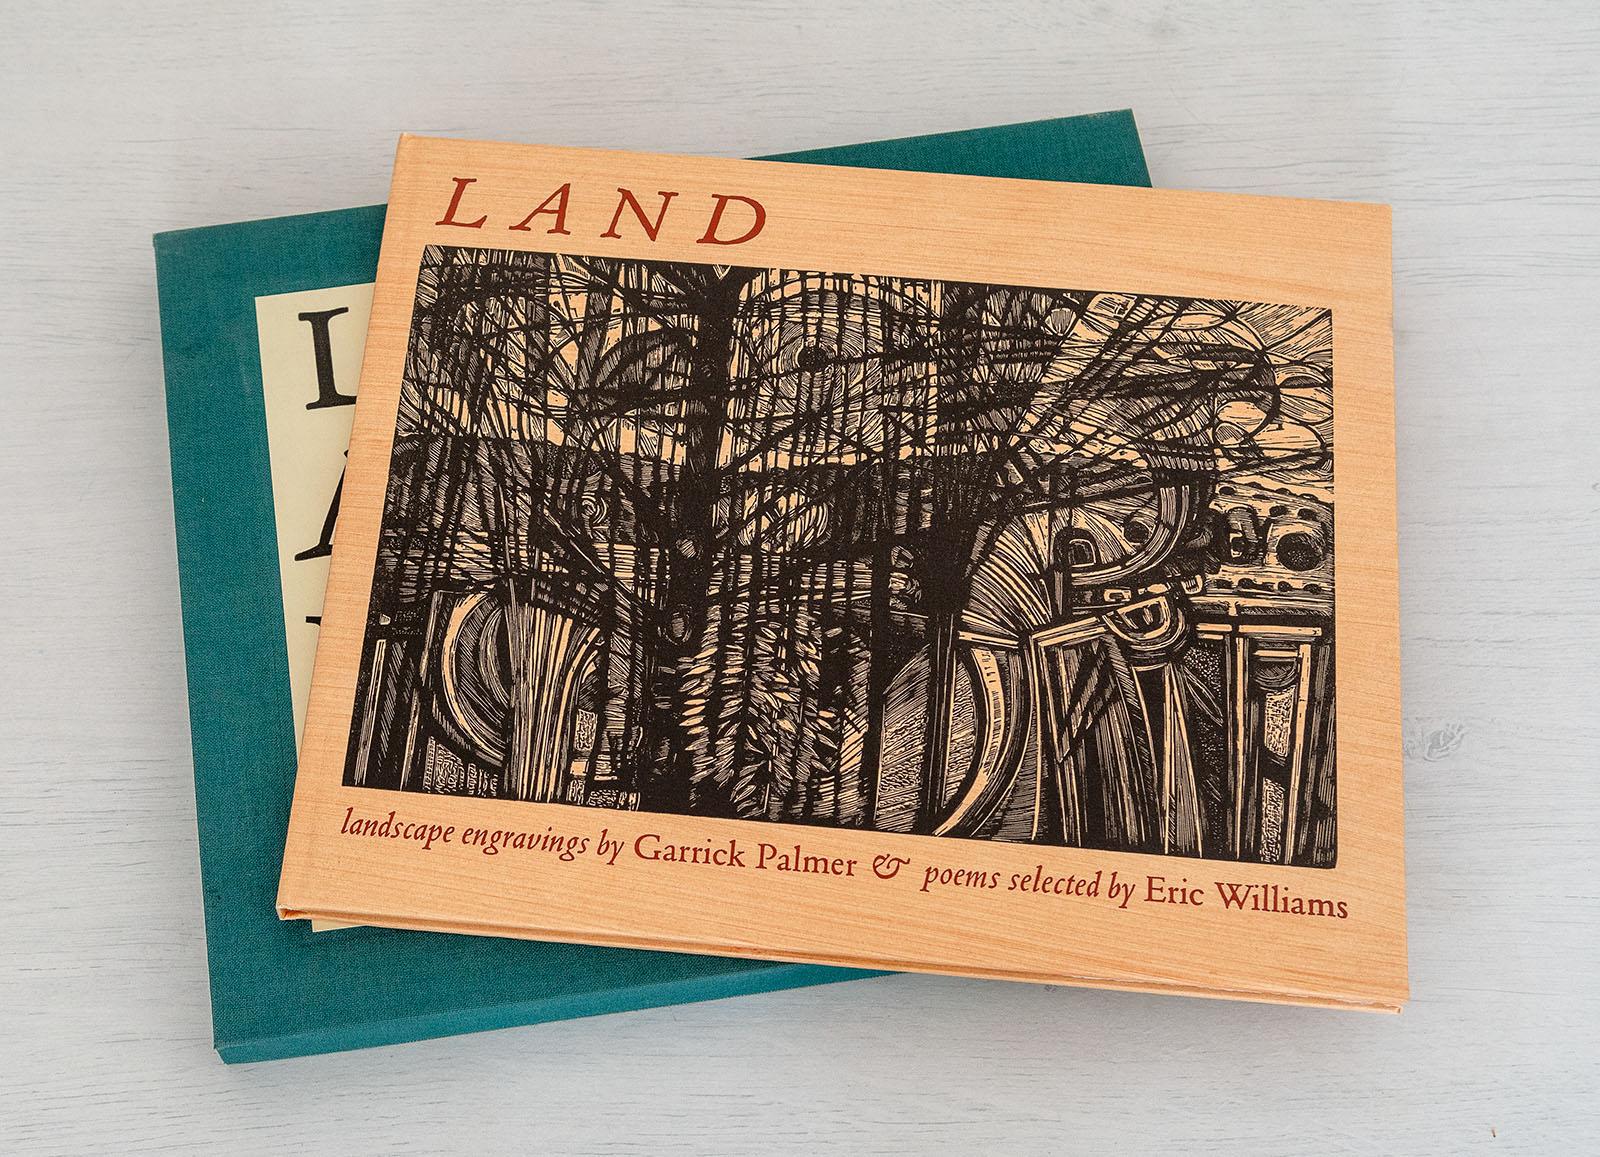 'Land'

By Garrick Palmer with Eric Williams

Medium - Limited edition book of 240 copies, signed an dnumbered by the artist and presented in a clothbound slipcase.

Signed - Yes

Edition - 62/240

Published by - The Old Style press

Size - 280mm x